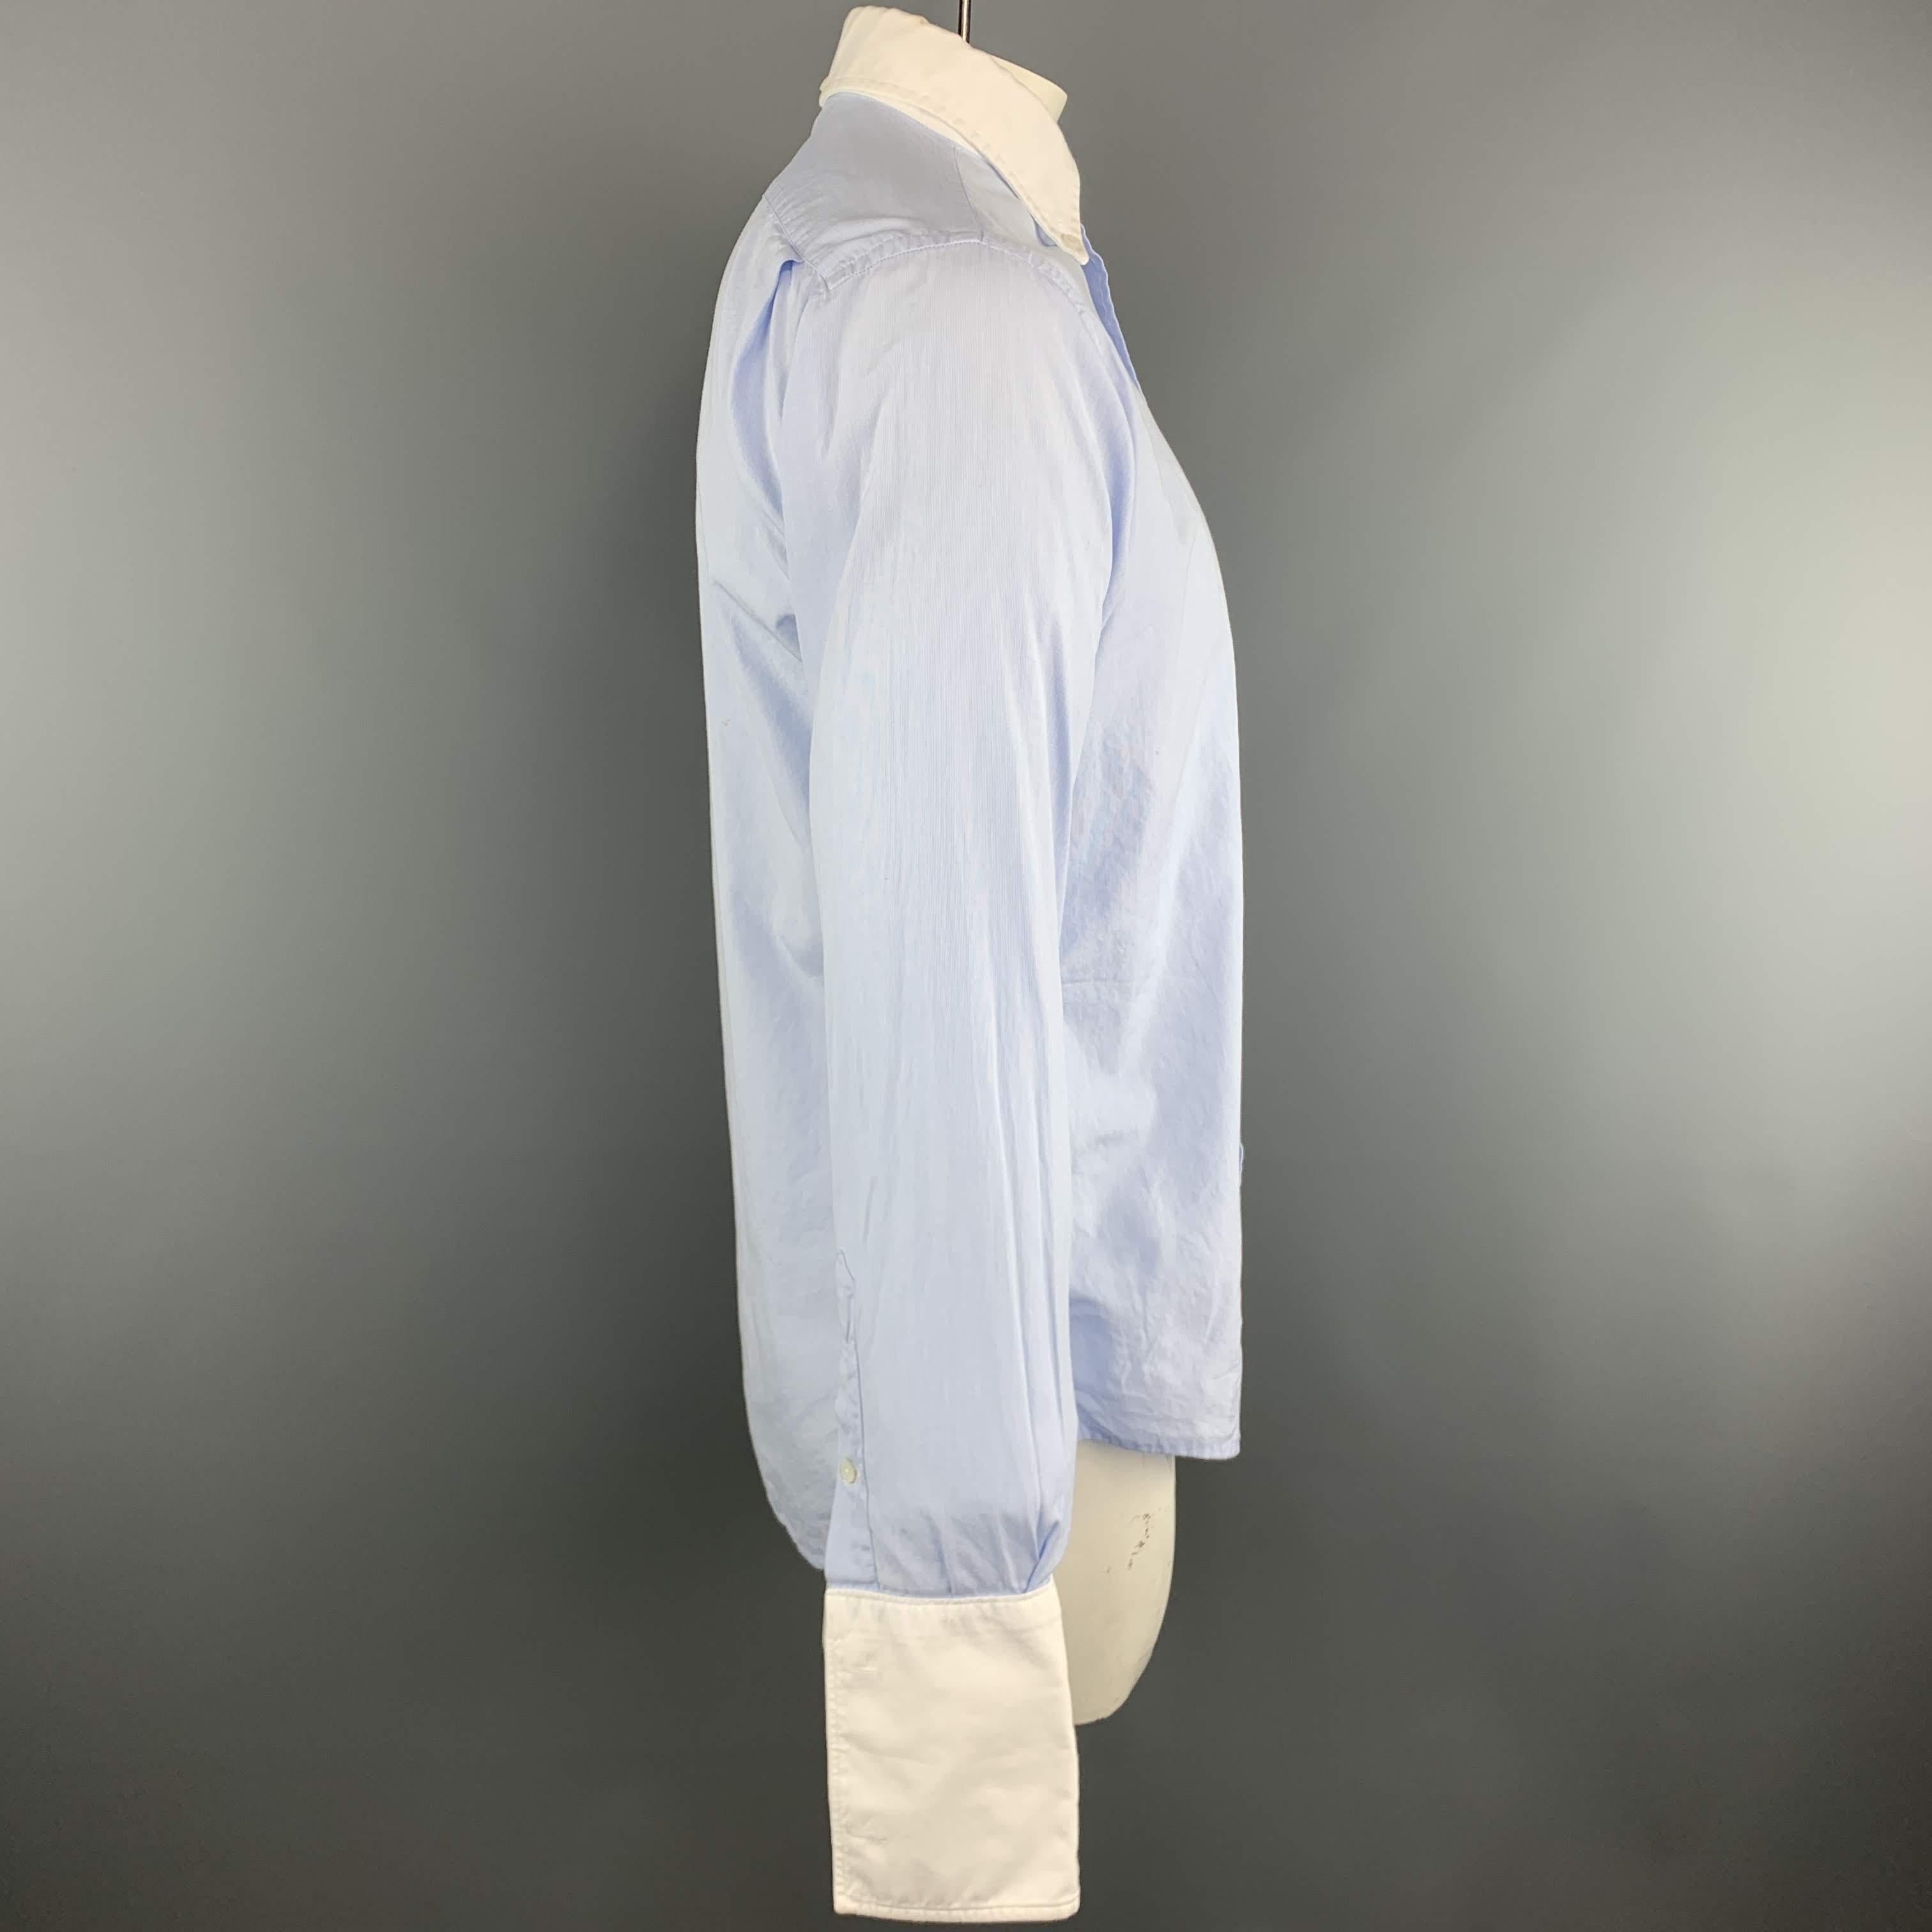 Men's THOM BROWNE Size XL Light Blue Solid Cotton French Cuff Long Sleeve Shirt